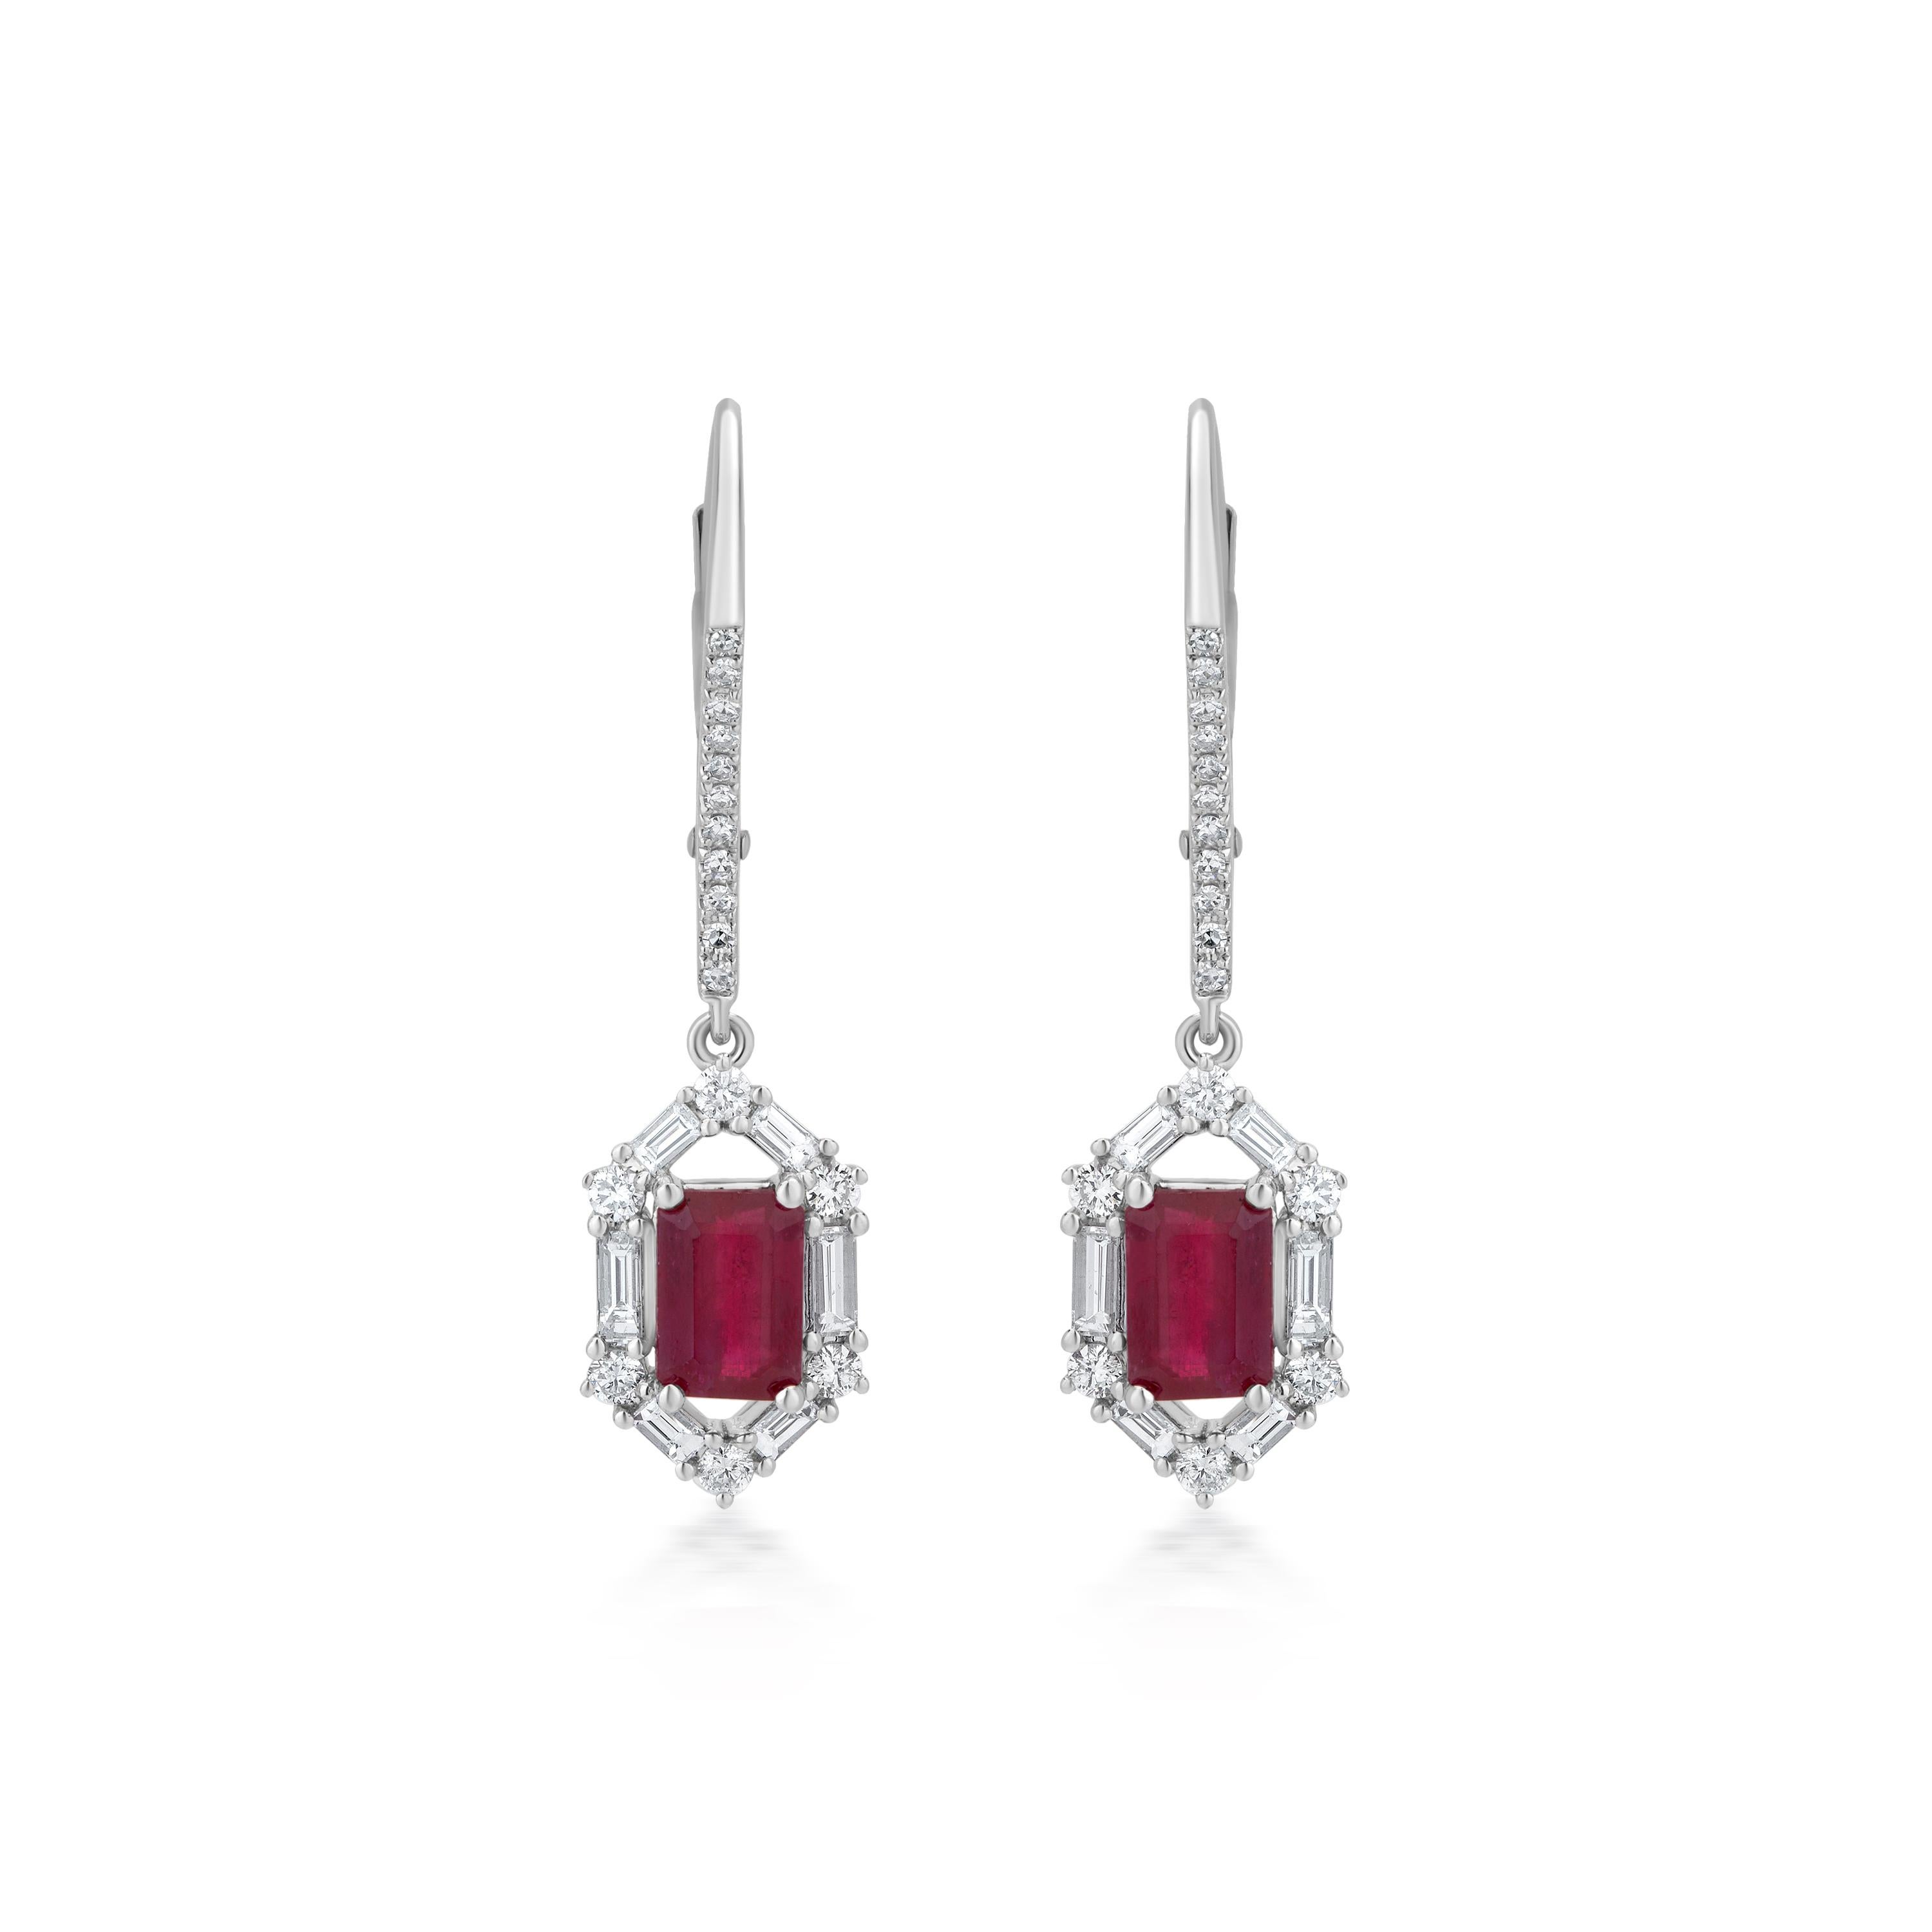 Octagon Cut Gemistry 2.11 Cttw. Octagon Ruby and Diamond Drop Earrings in 18k White Gold For Sale